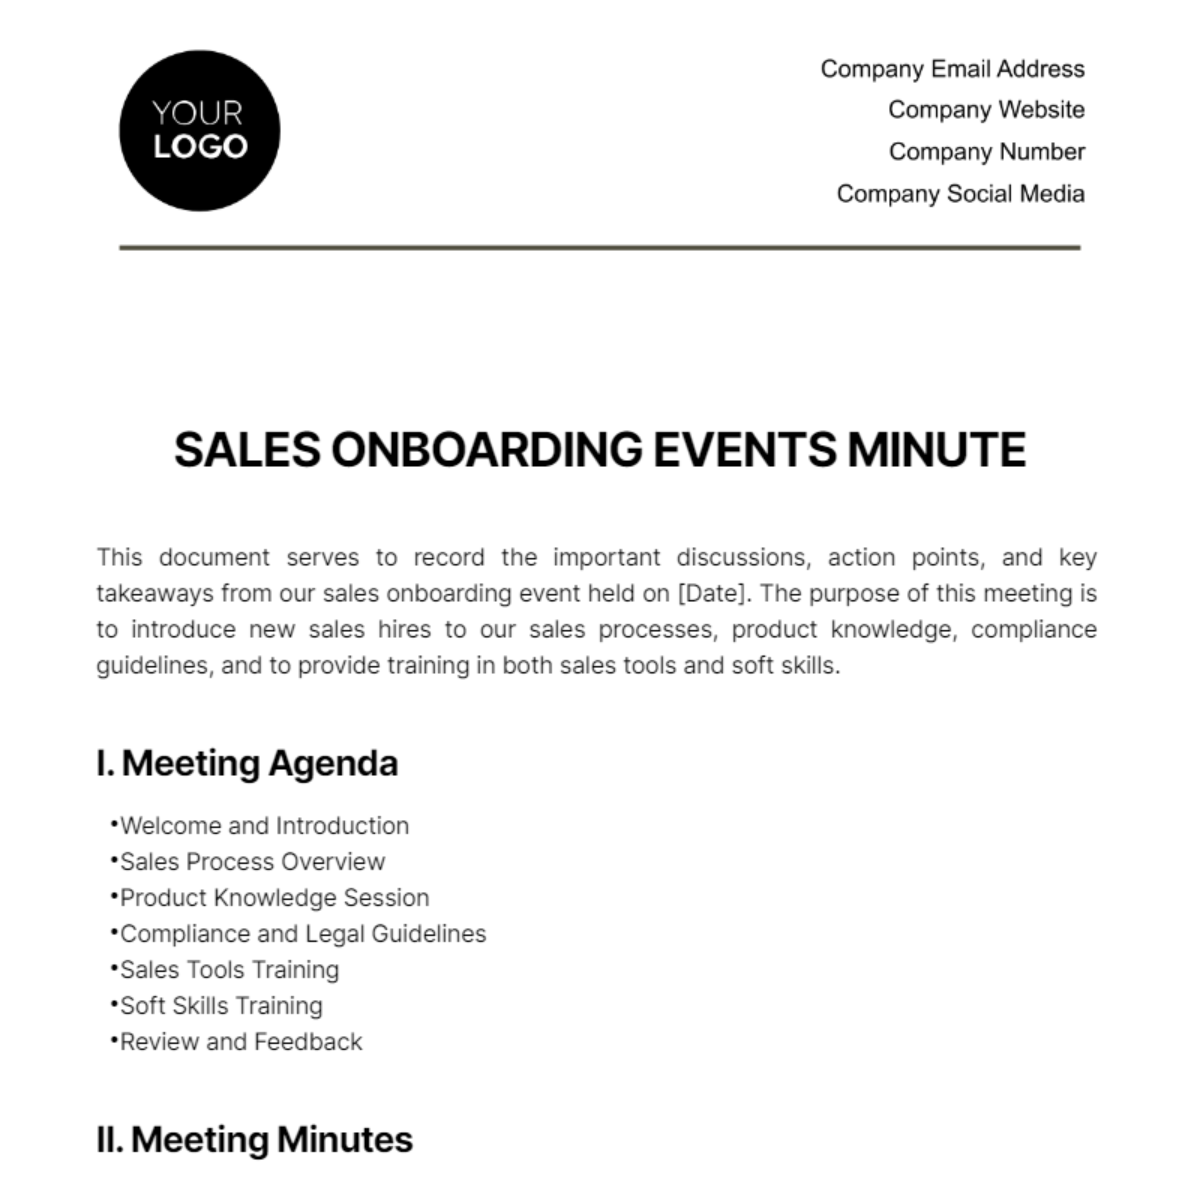 Free Sales Onboarding Events Minute Template